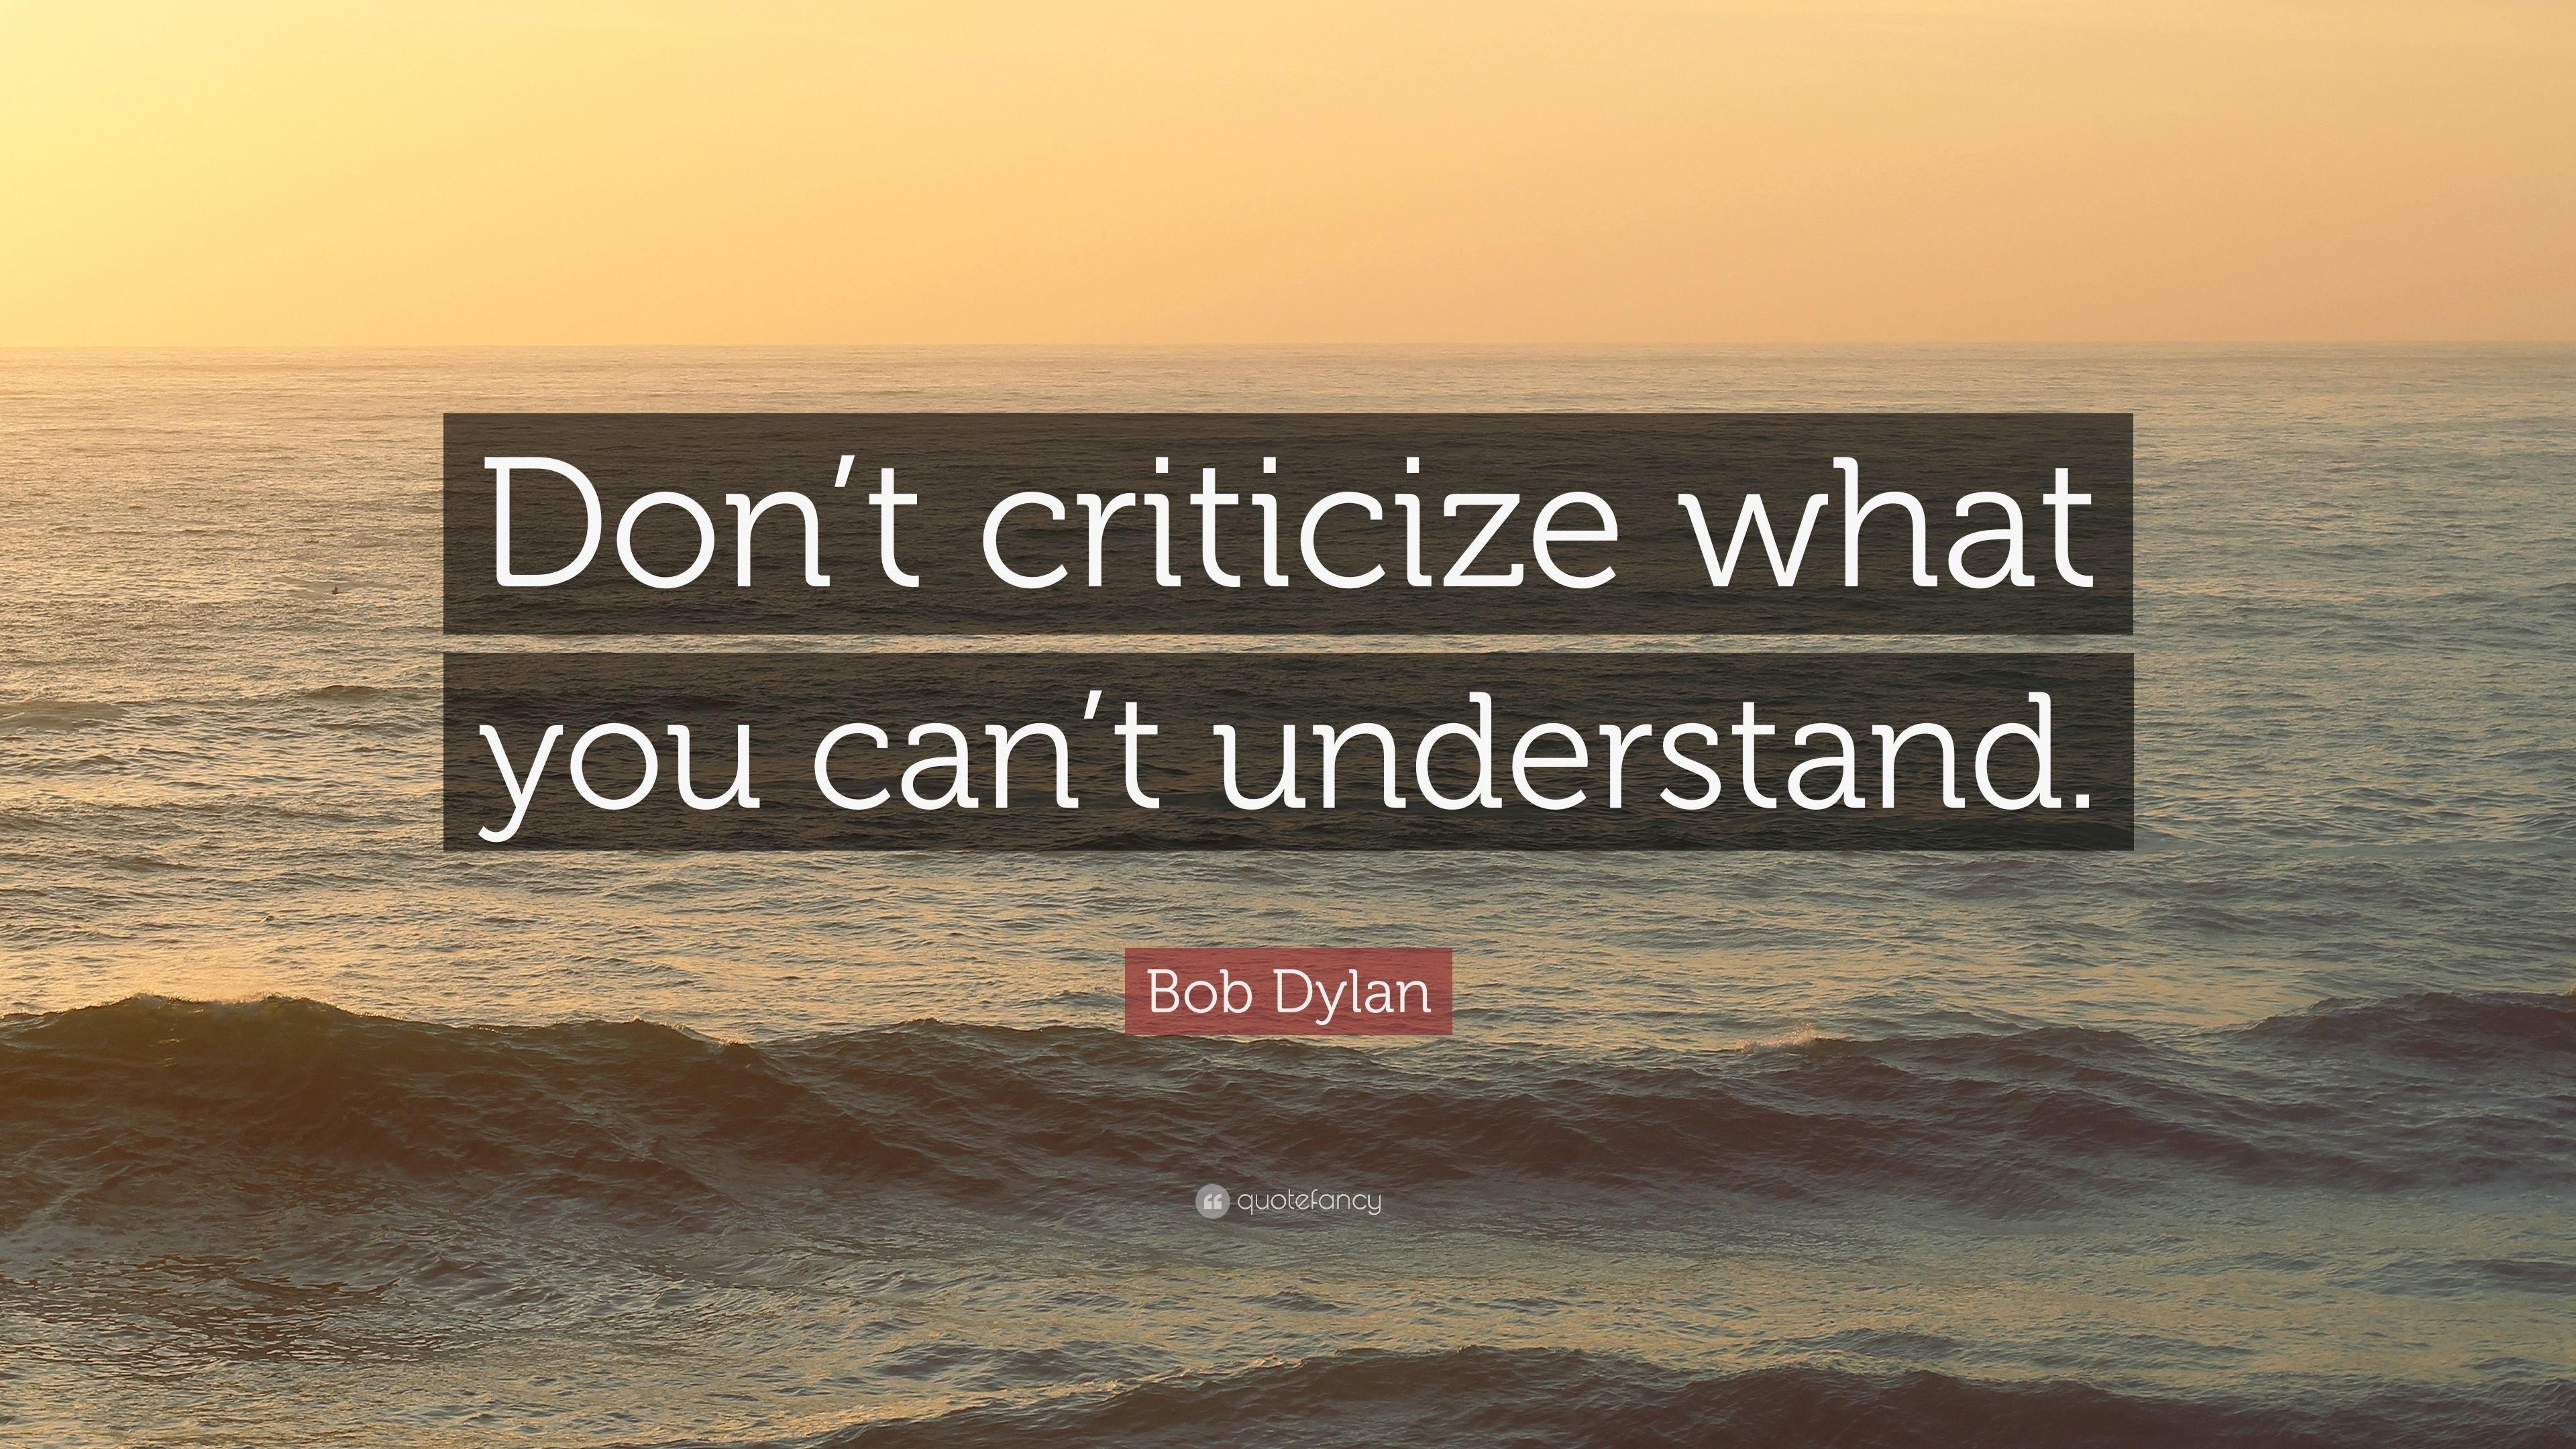 Who You Can't Criticize